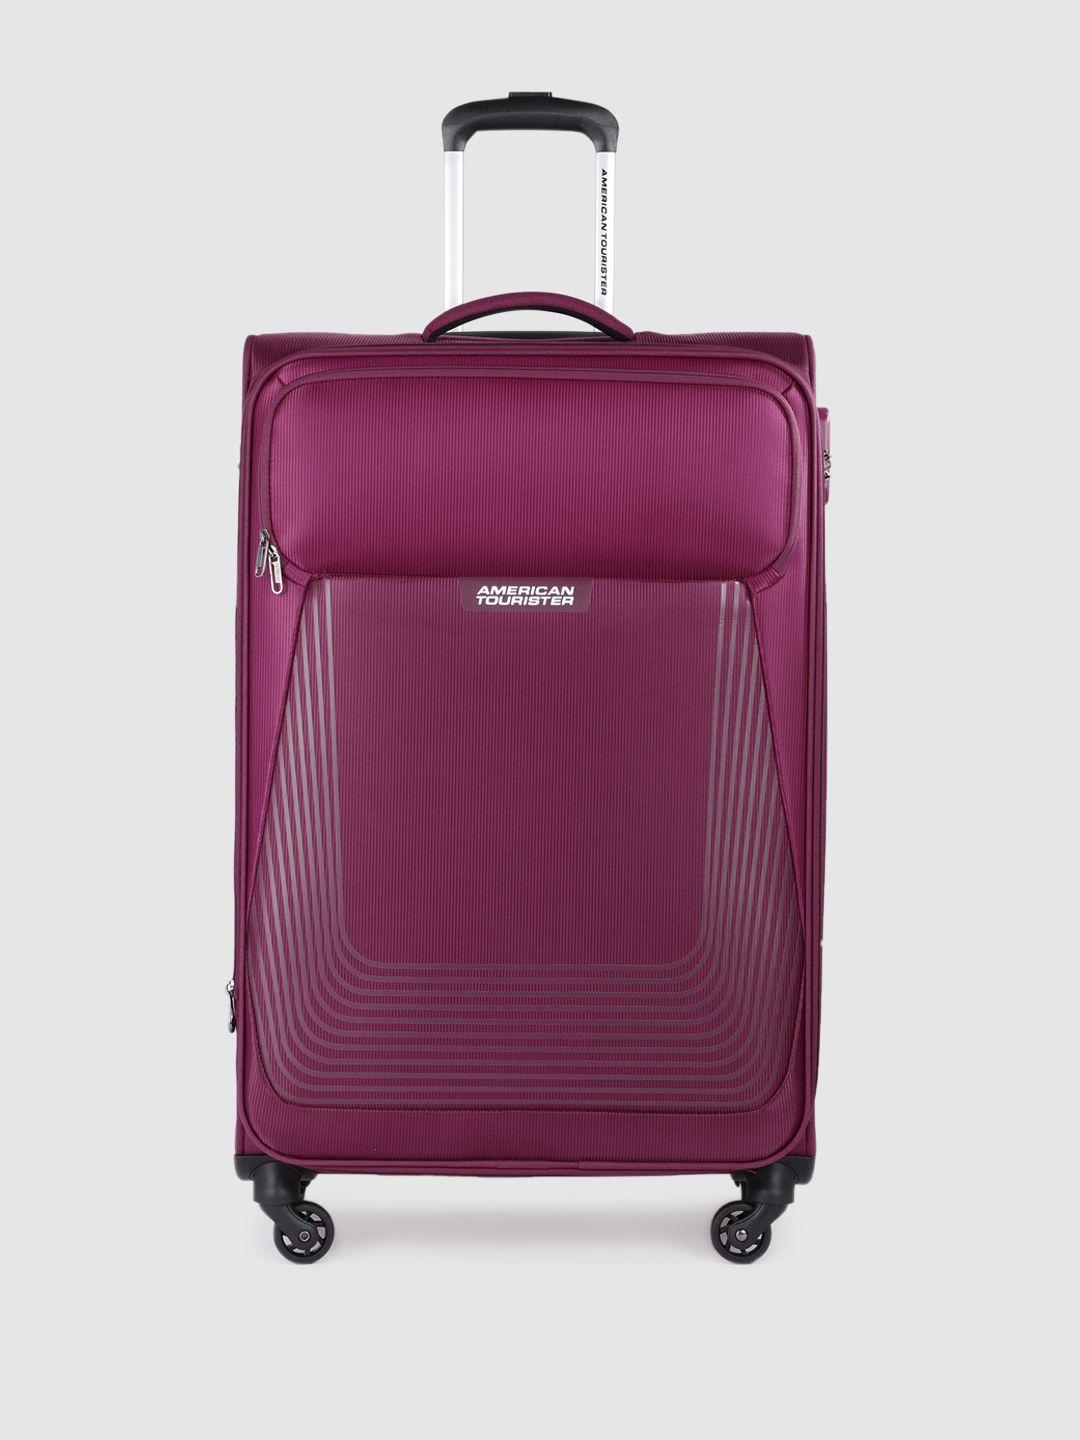 american-tourister-striped-large-trolley-suitcase